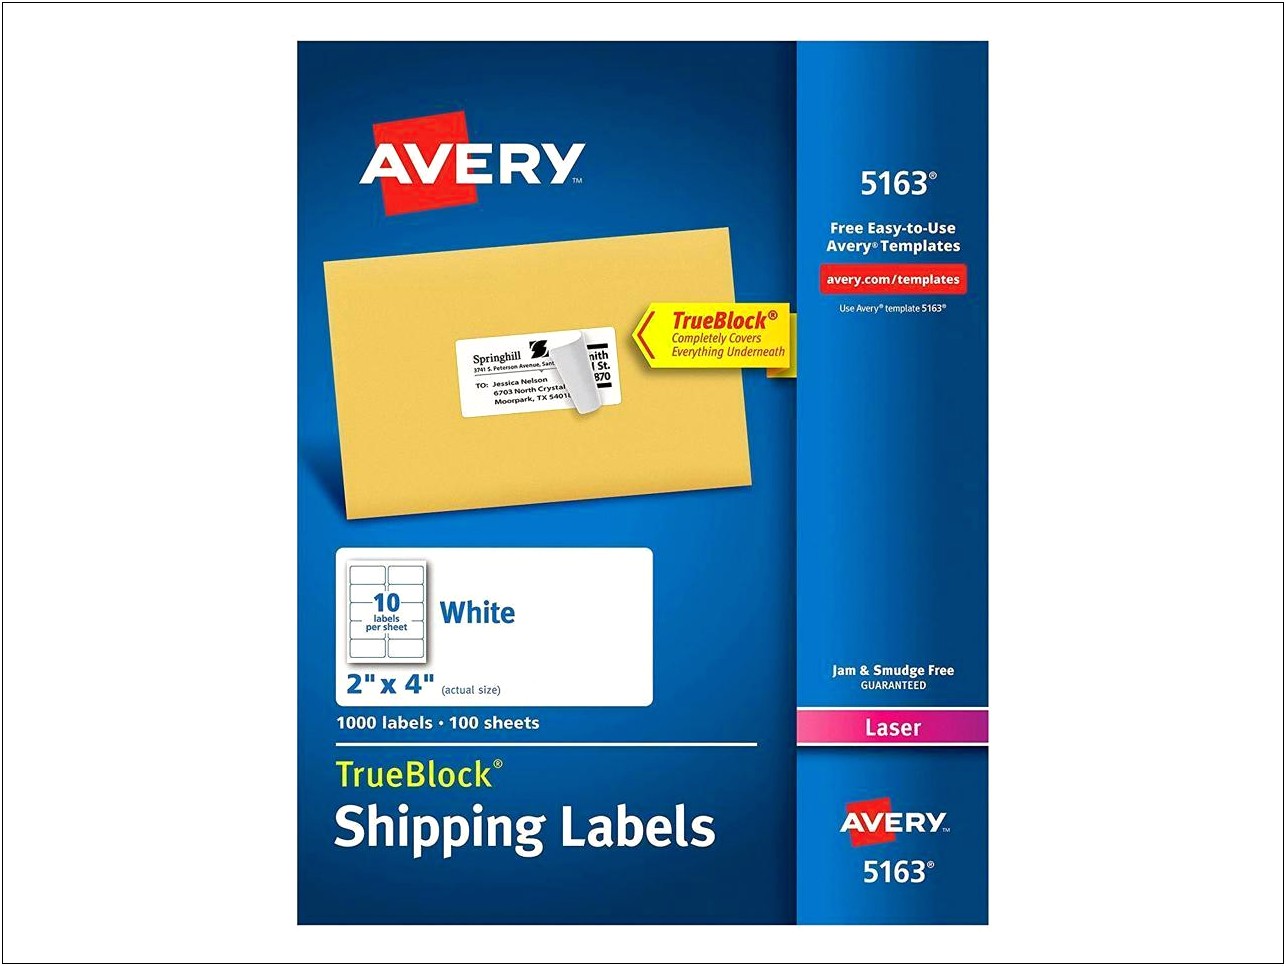 Avery 8163 Template For Word 2016